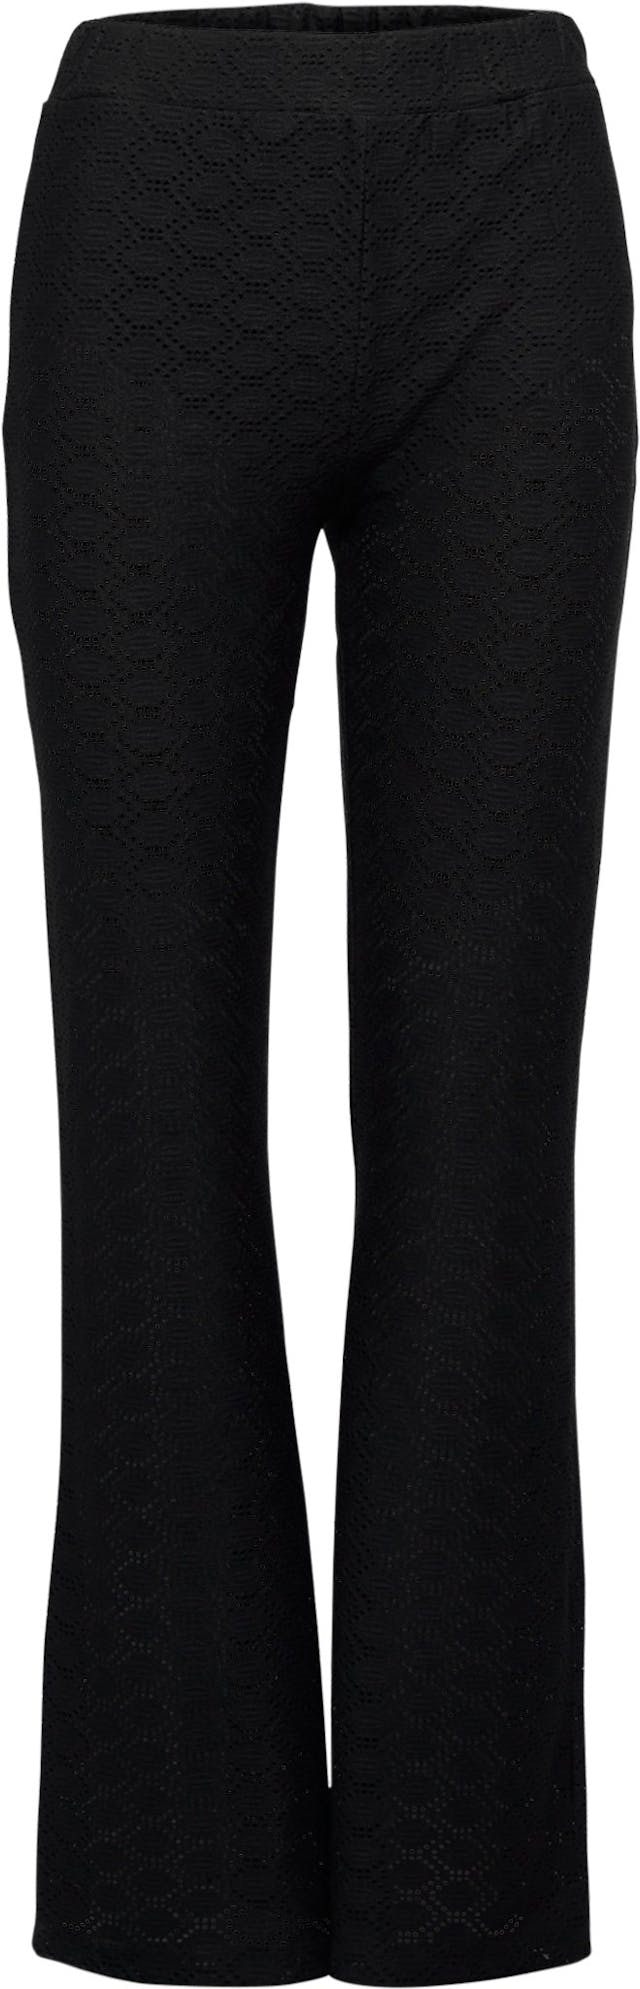 Product image for Knitted Lace Pant - Women's